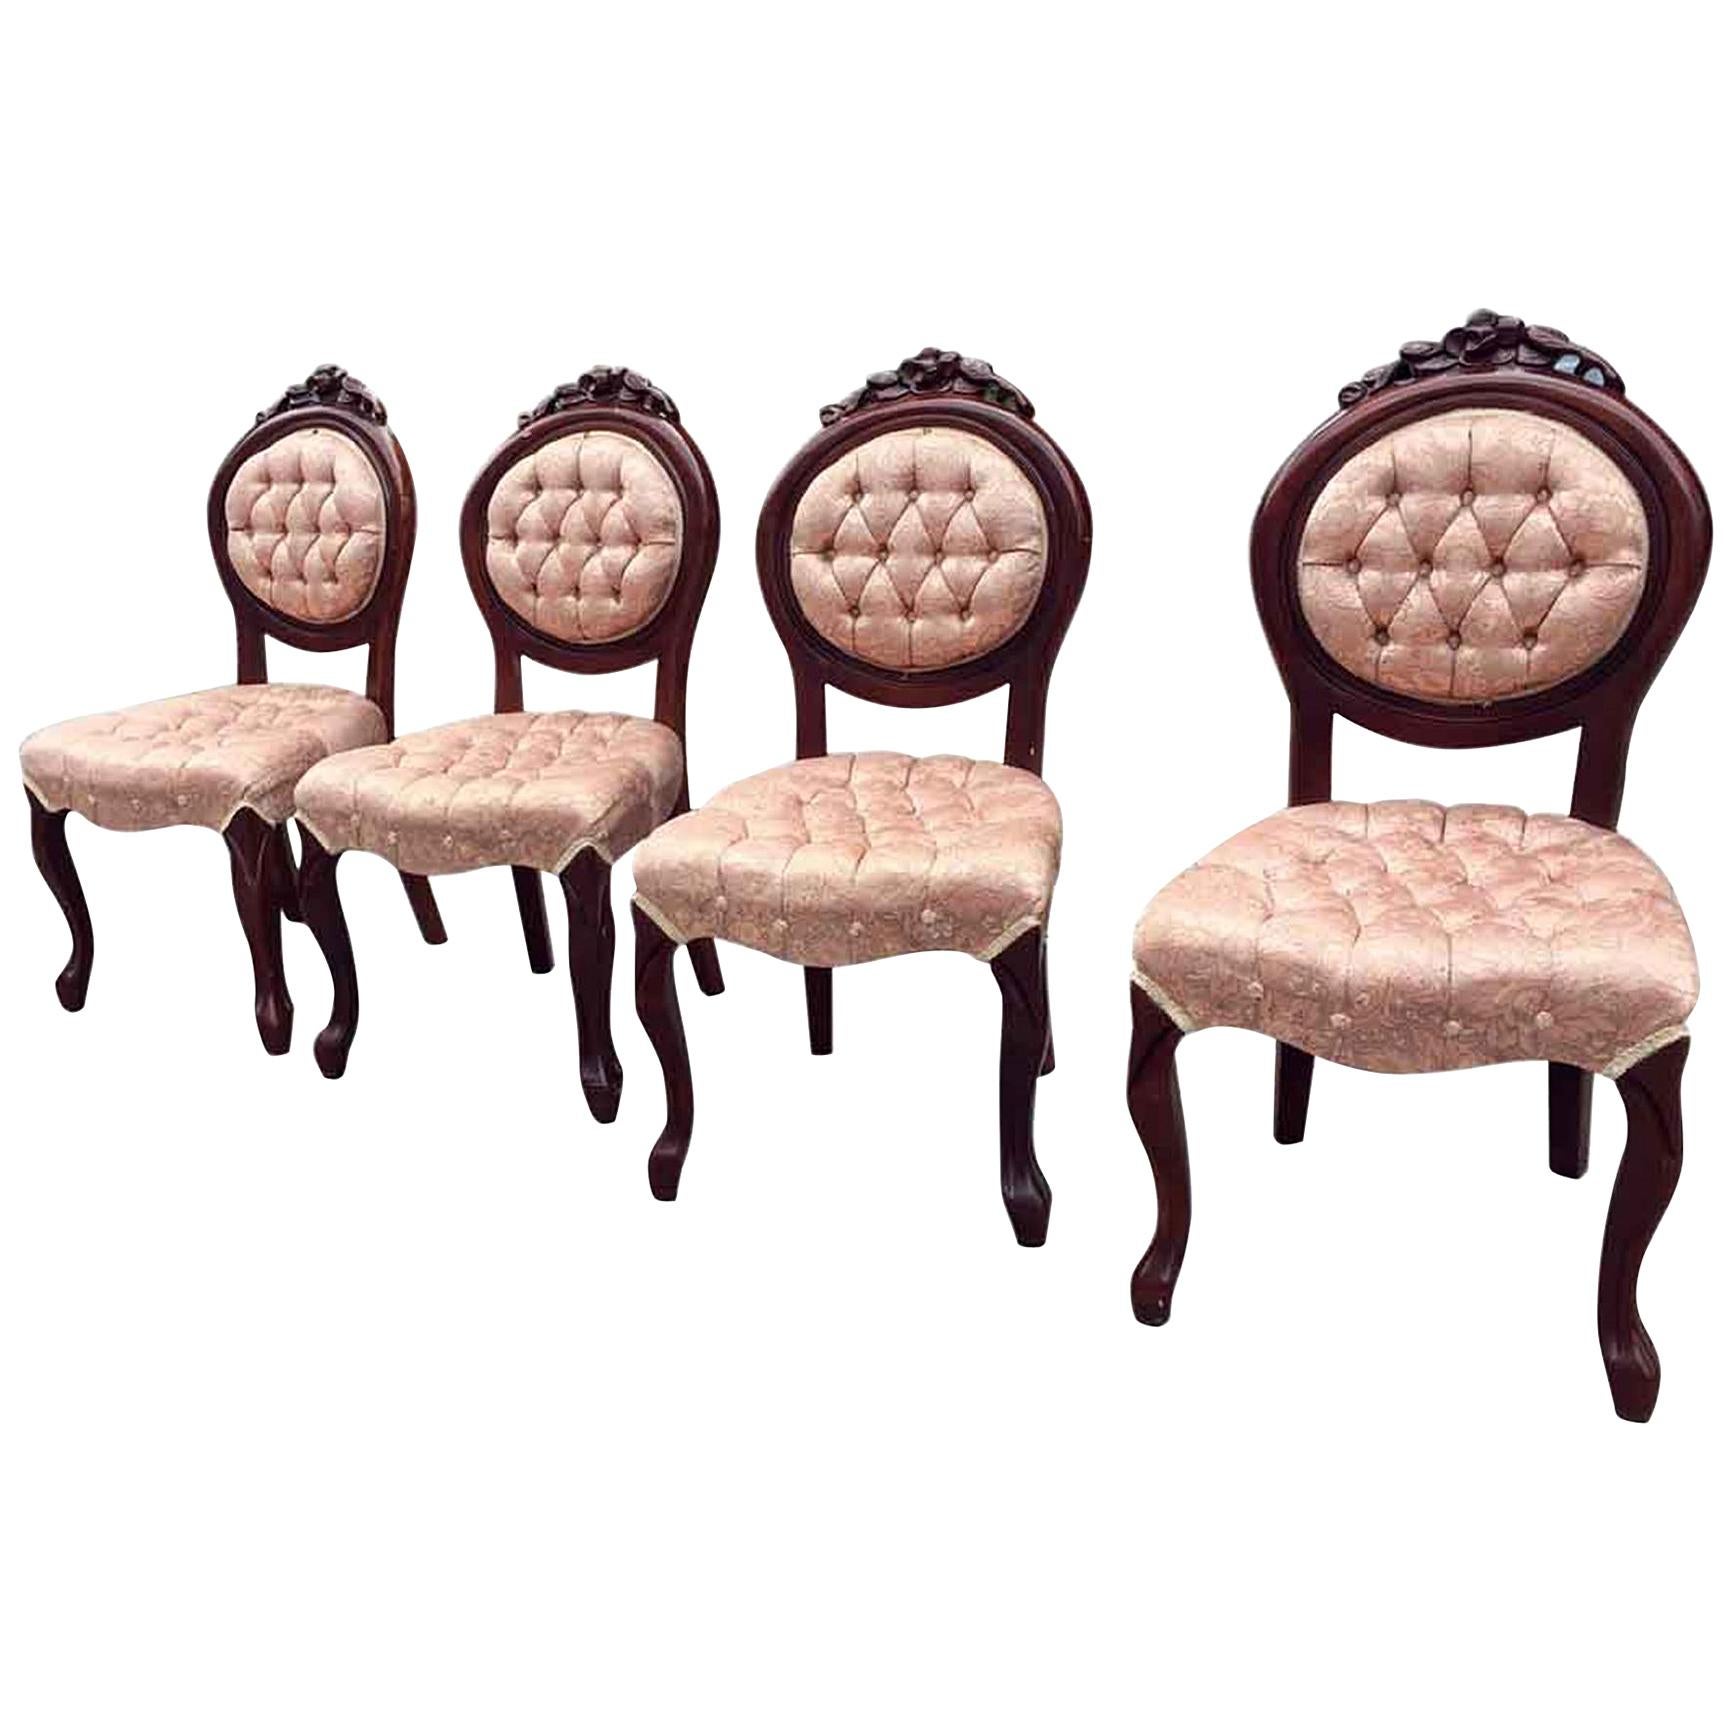 1970s Set of Four Carved French Dining Chairs with Tufted Pink Silk Upholstery